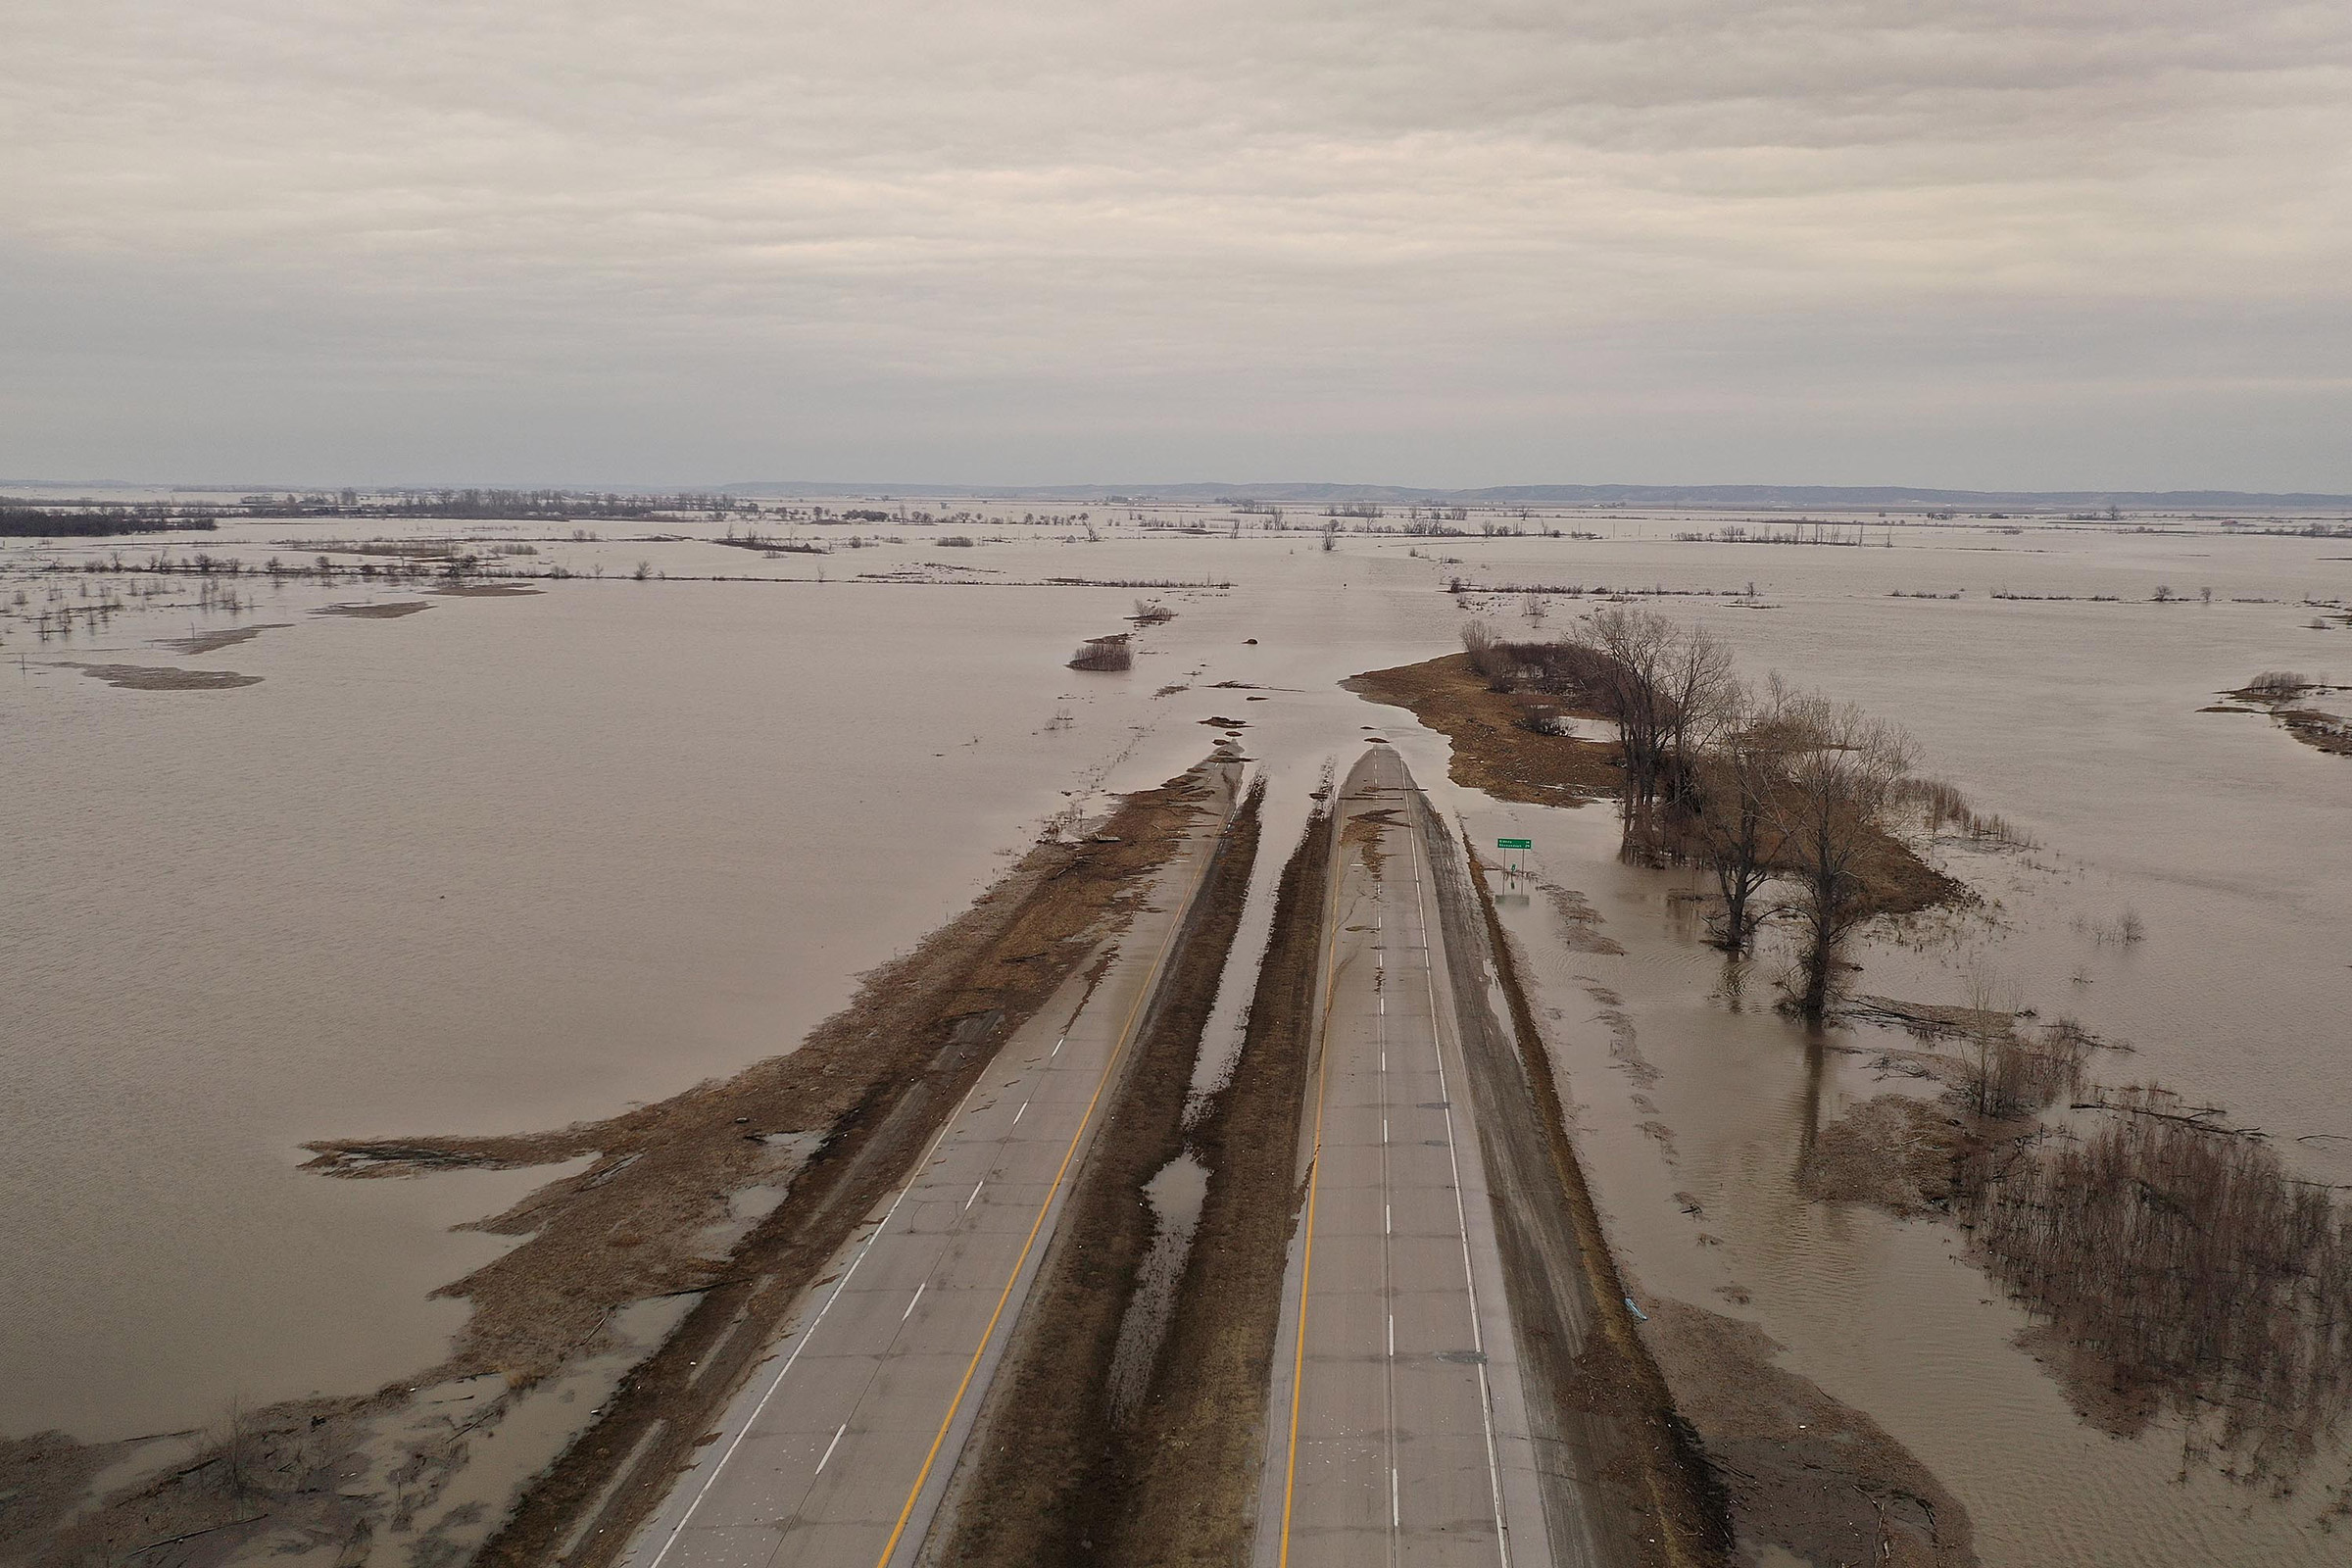 Floodwater covers Highway 2 near Sidney. Iowa on March 23, 2019. (Scott Olson—Getty Images)